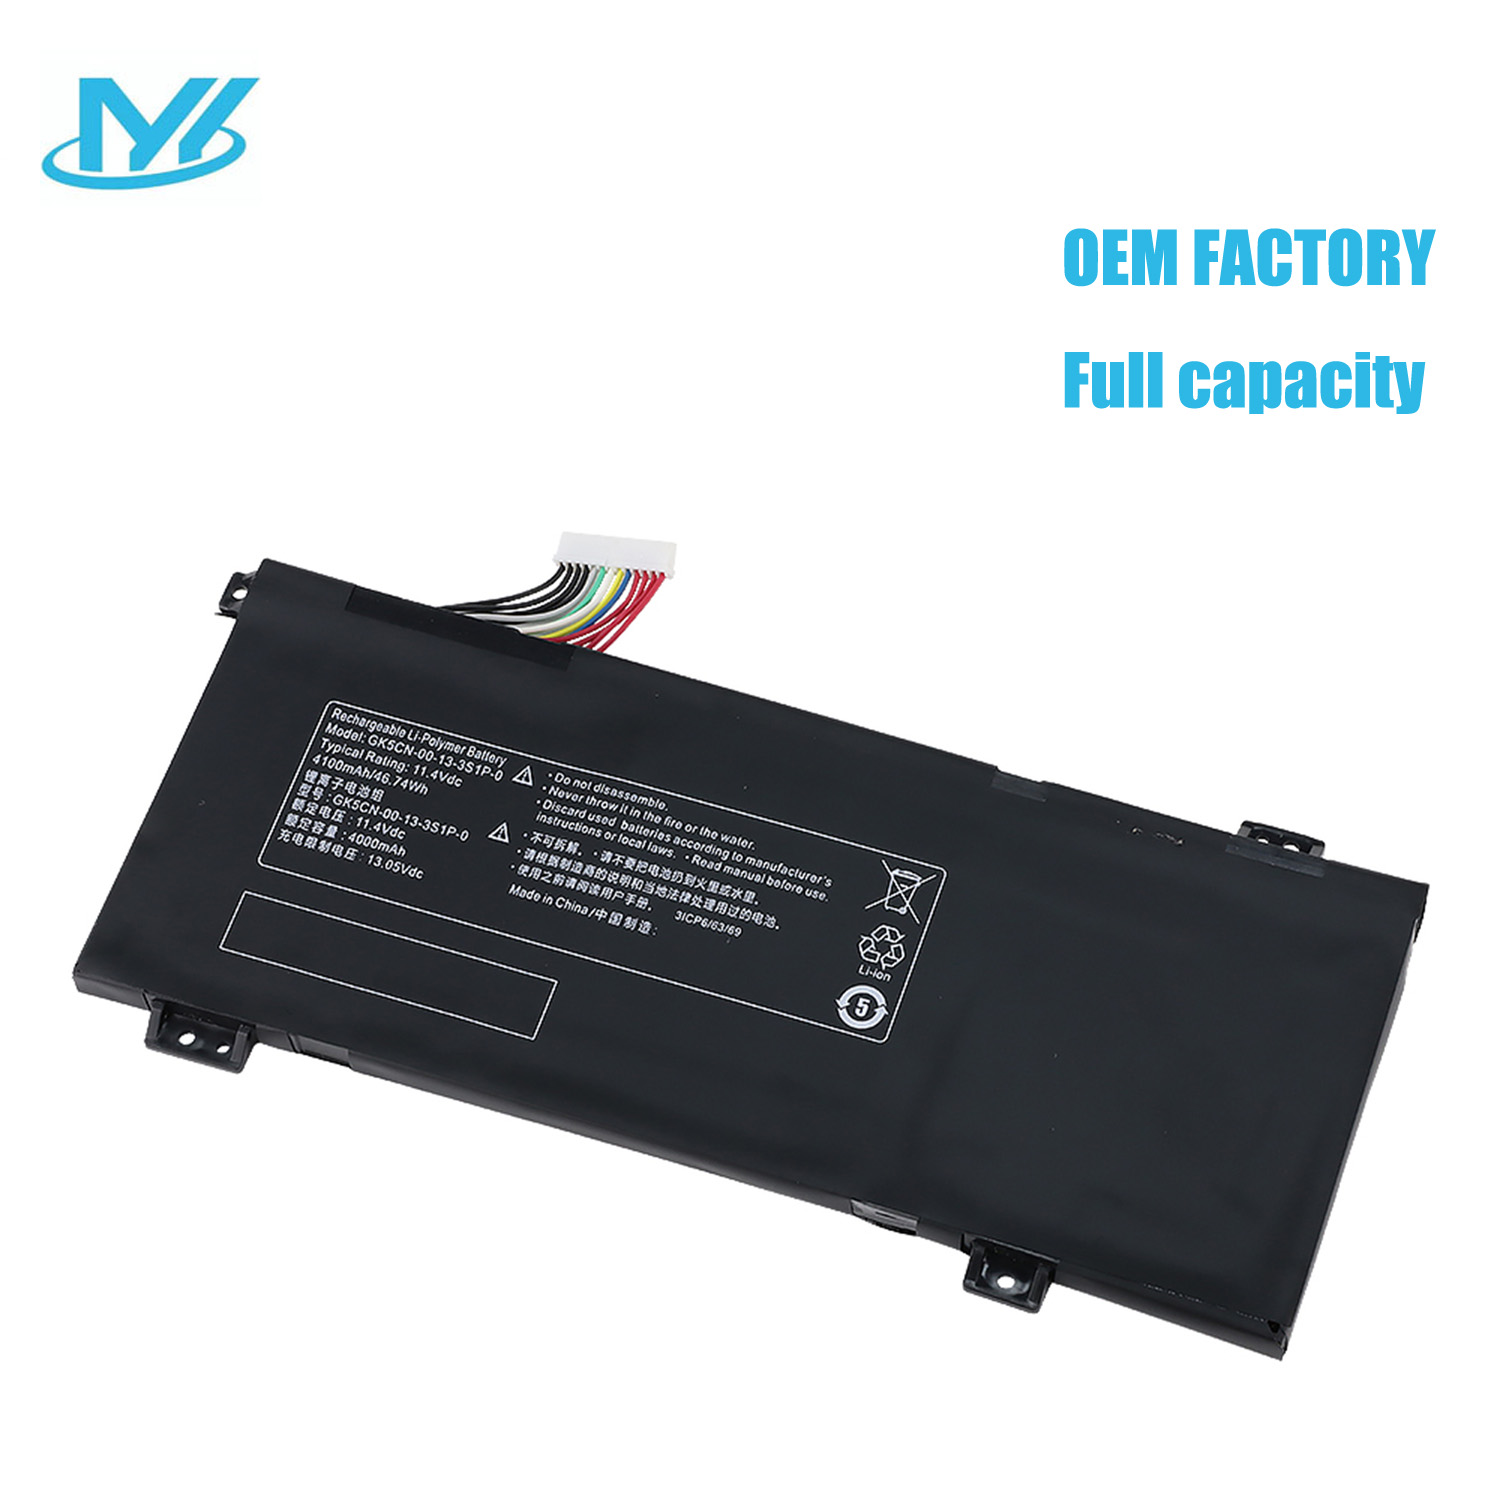 GK5CN-00-13-3S1P-0 rechargeable lithium ion Notebook battery Laptop battery 11.4V 4100MAH